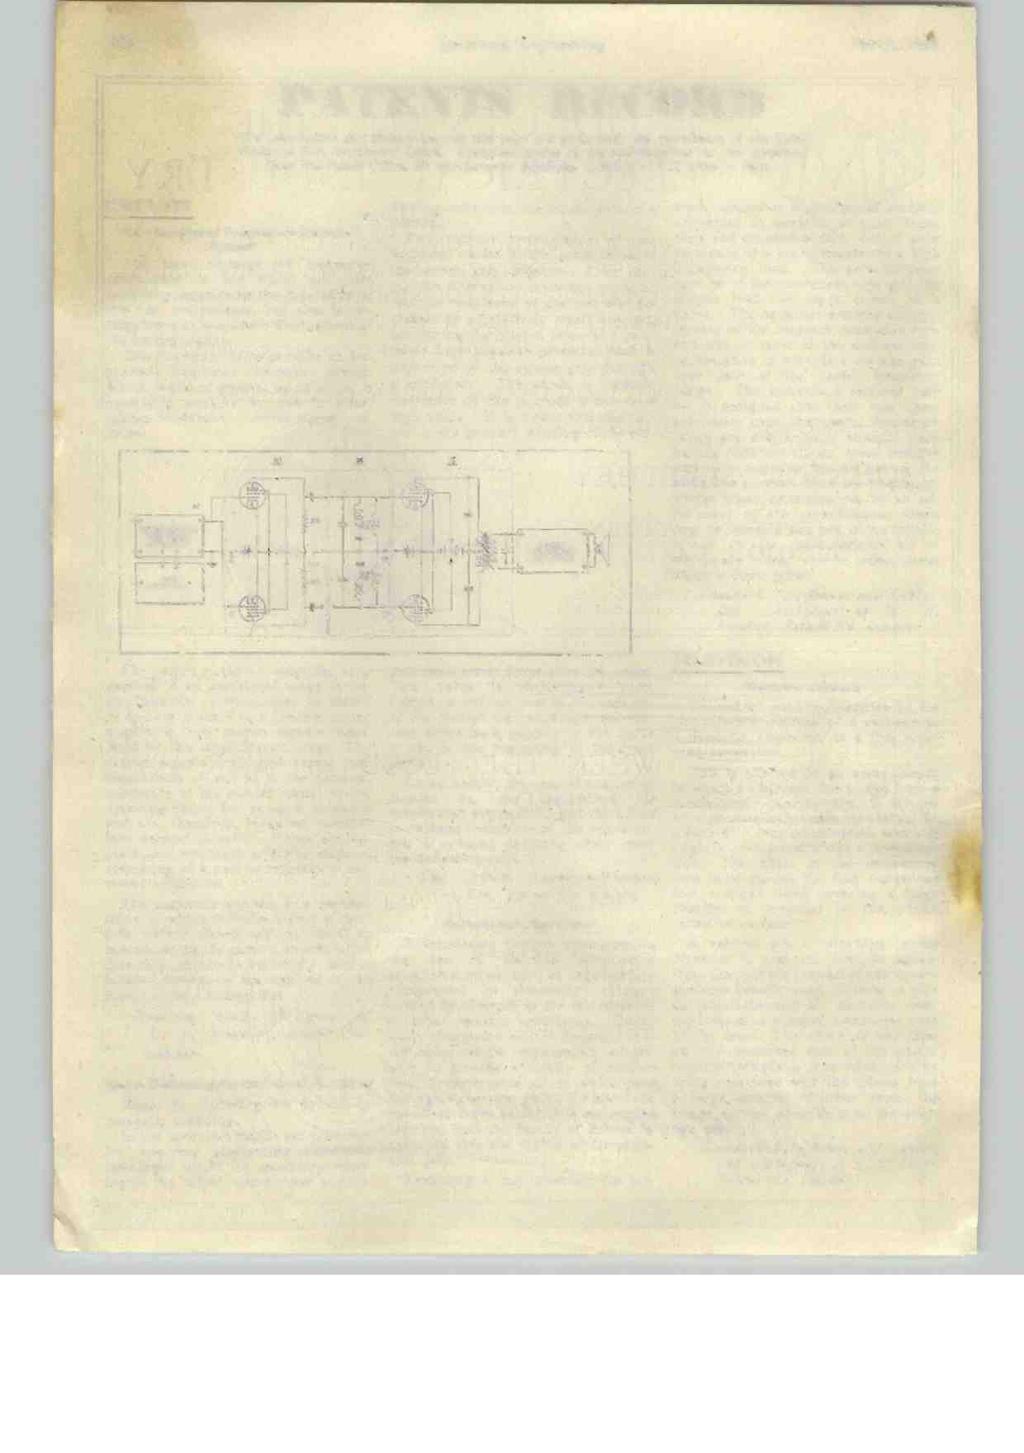 440 Electronic Engineering March, 19443 PATENTS RECORD CIRCUITS The information and illustrations on this page are given with the permission of the Controller of H.M. Stationery Office.